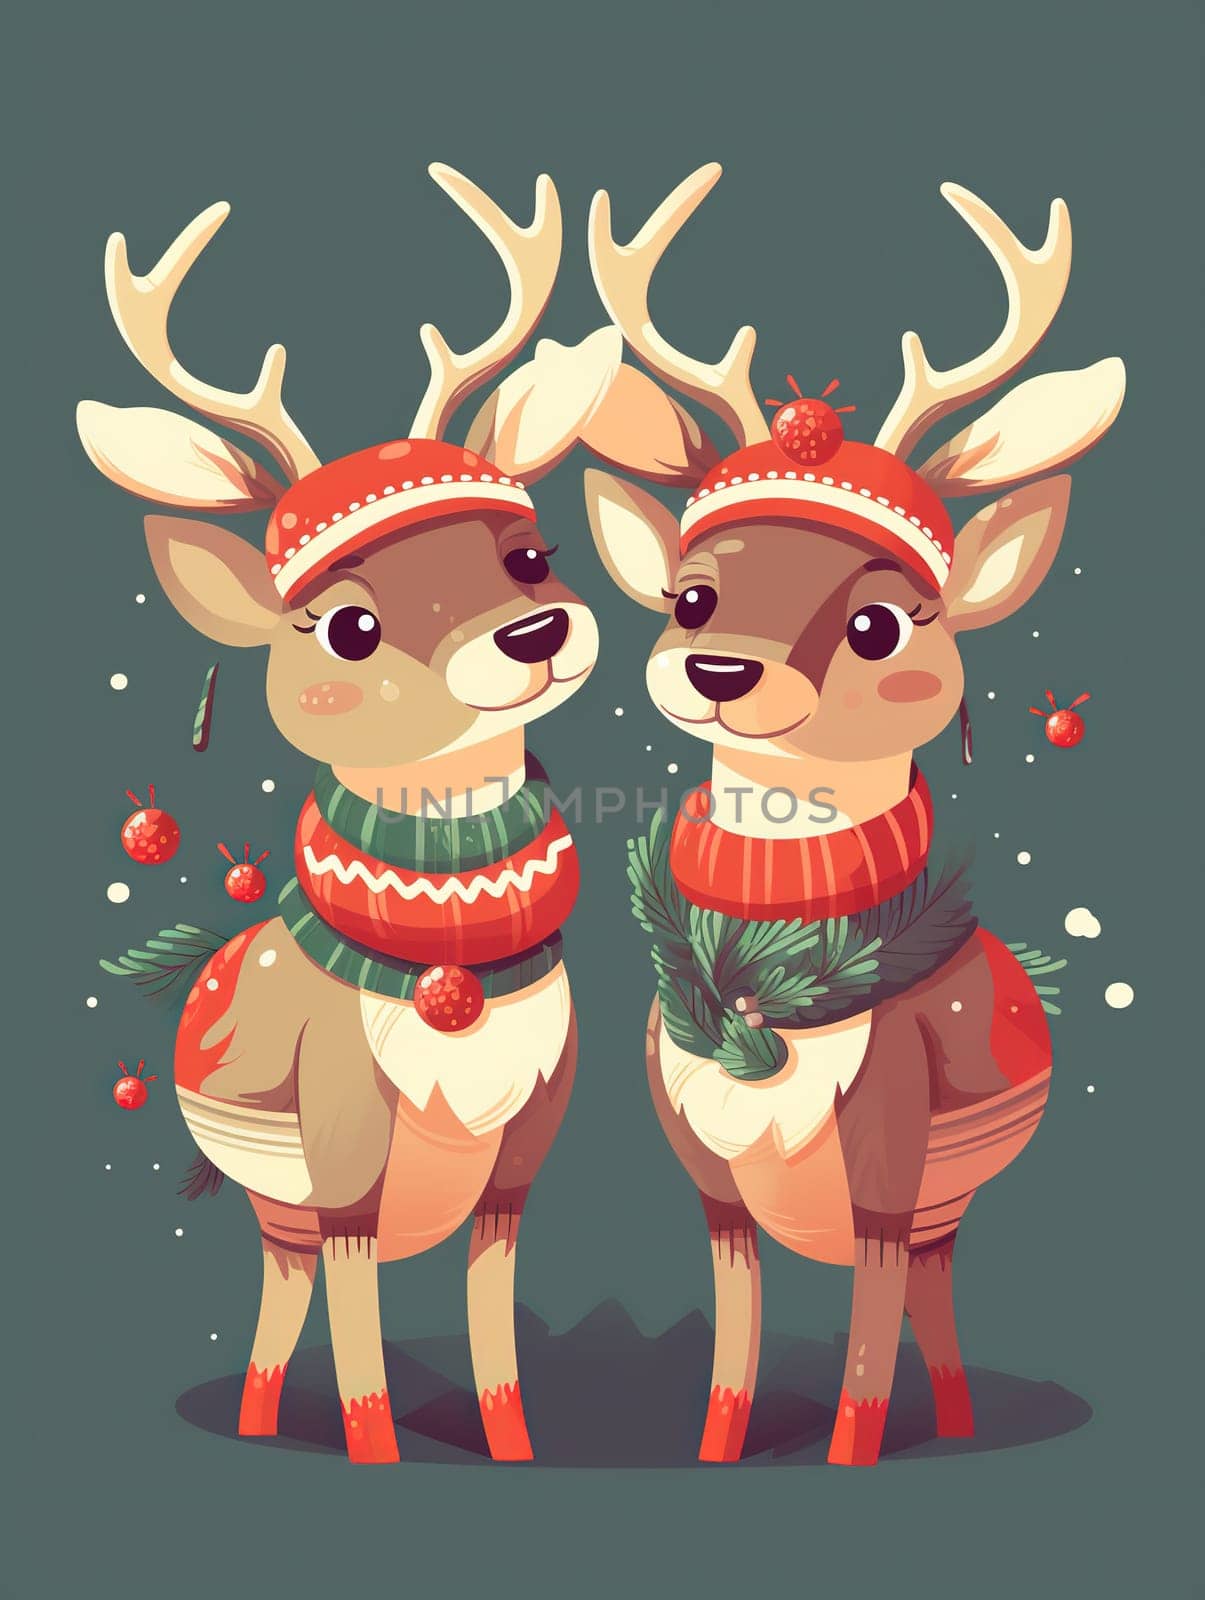 Christmas Reindeer Raster Illustration Features Two Festive Christmas Deer With Holiday Decorations